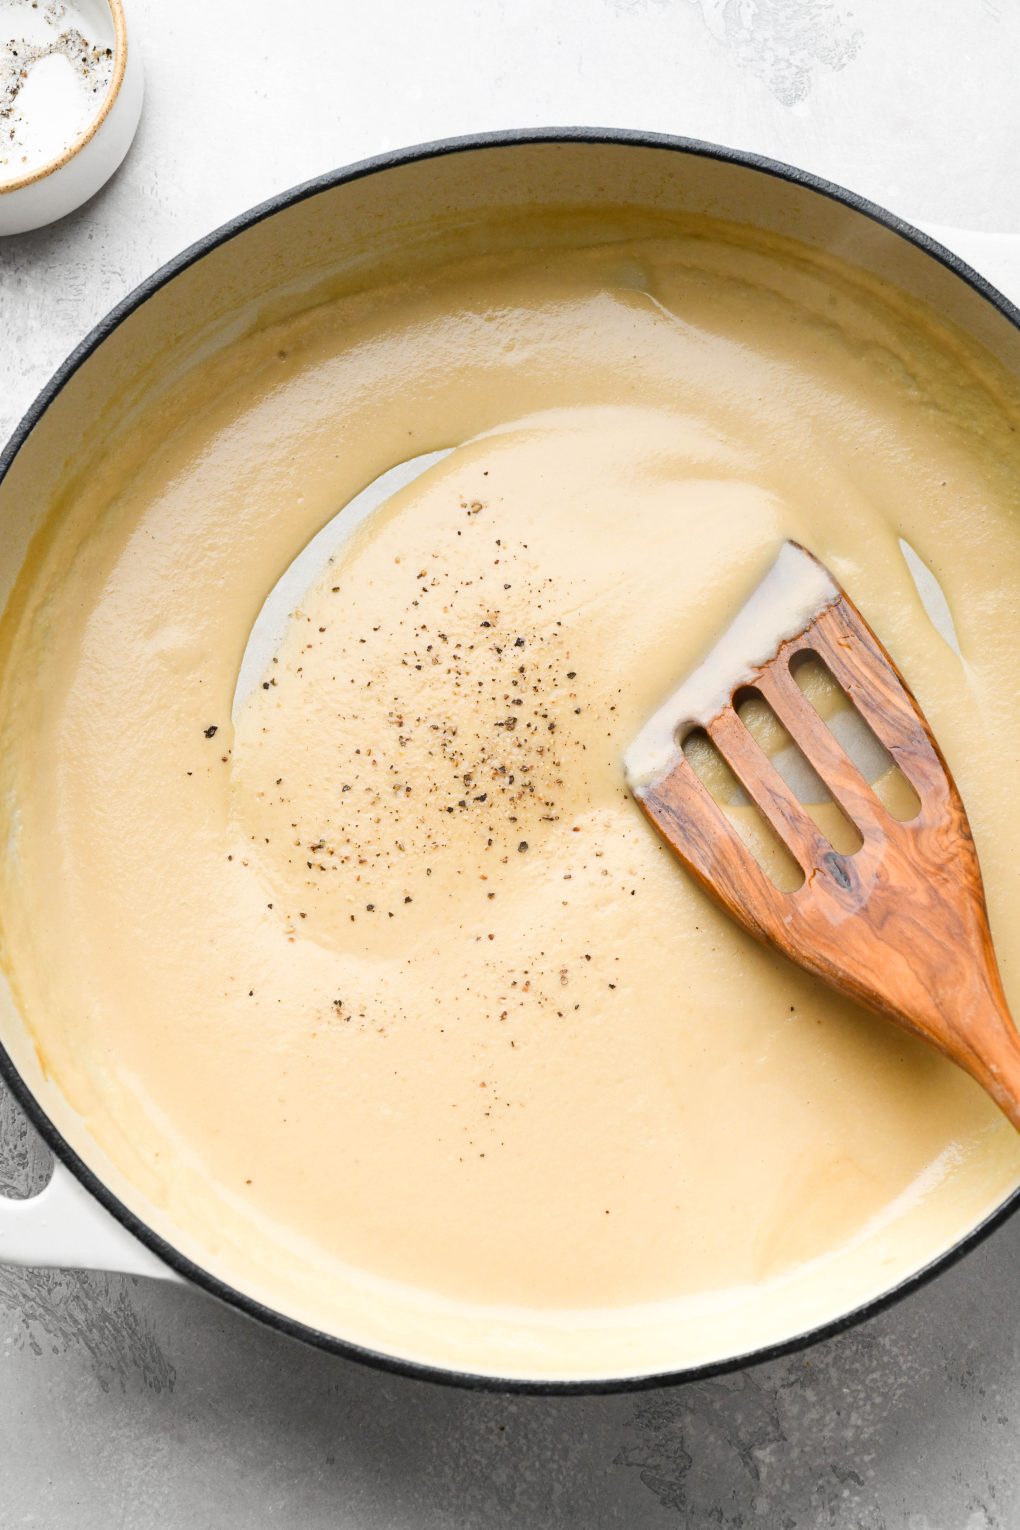 Photos showing how to make Whole30 gravy - Blended gravy back in the skillet, seasoned with salt and pepper. 